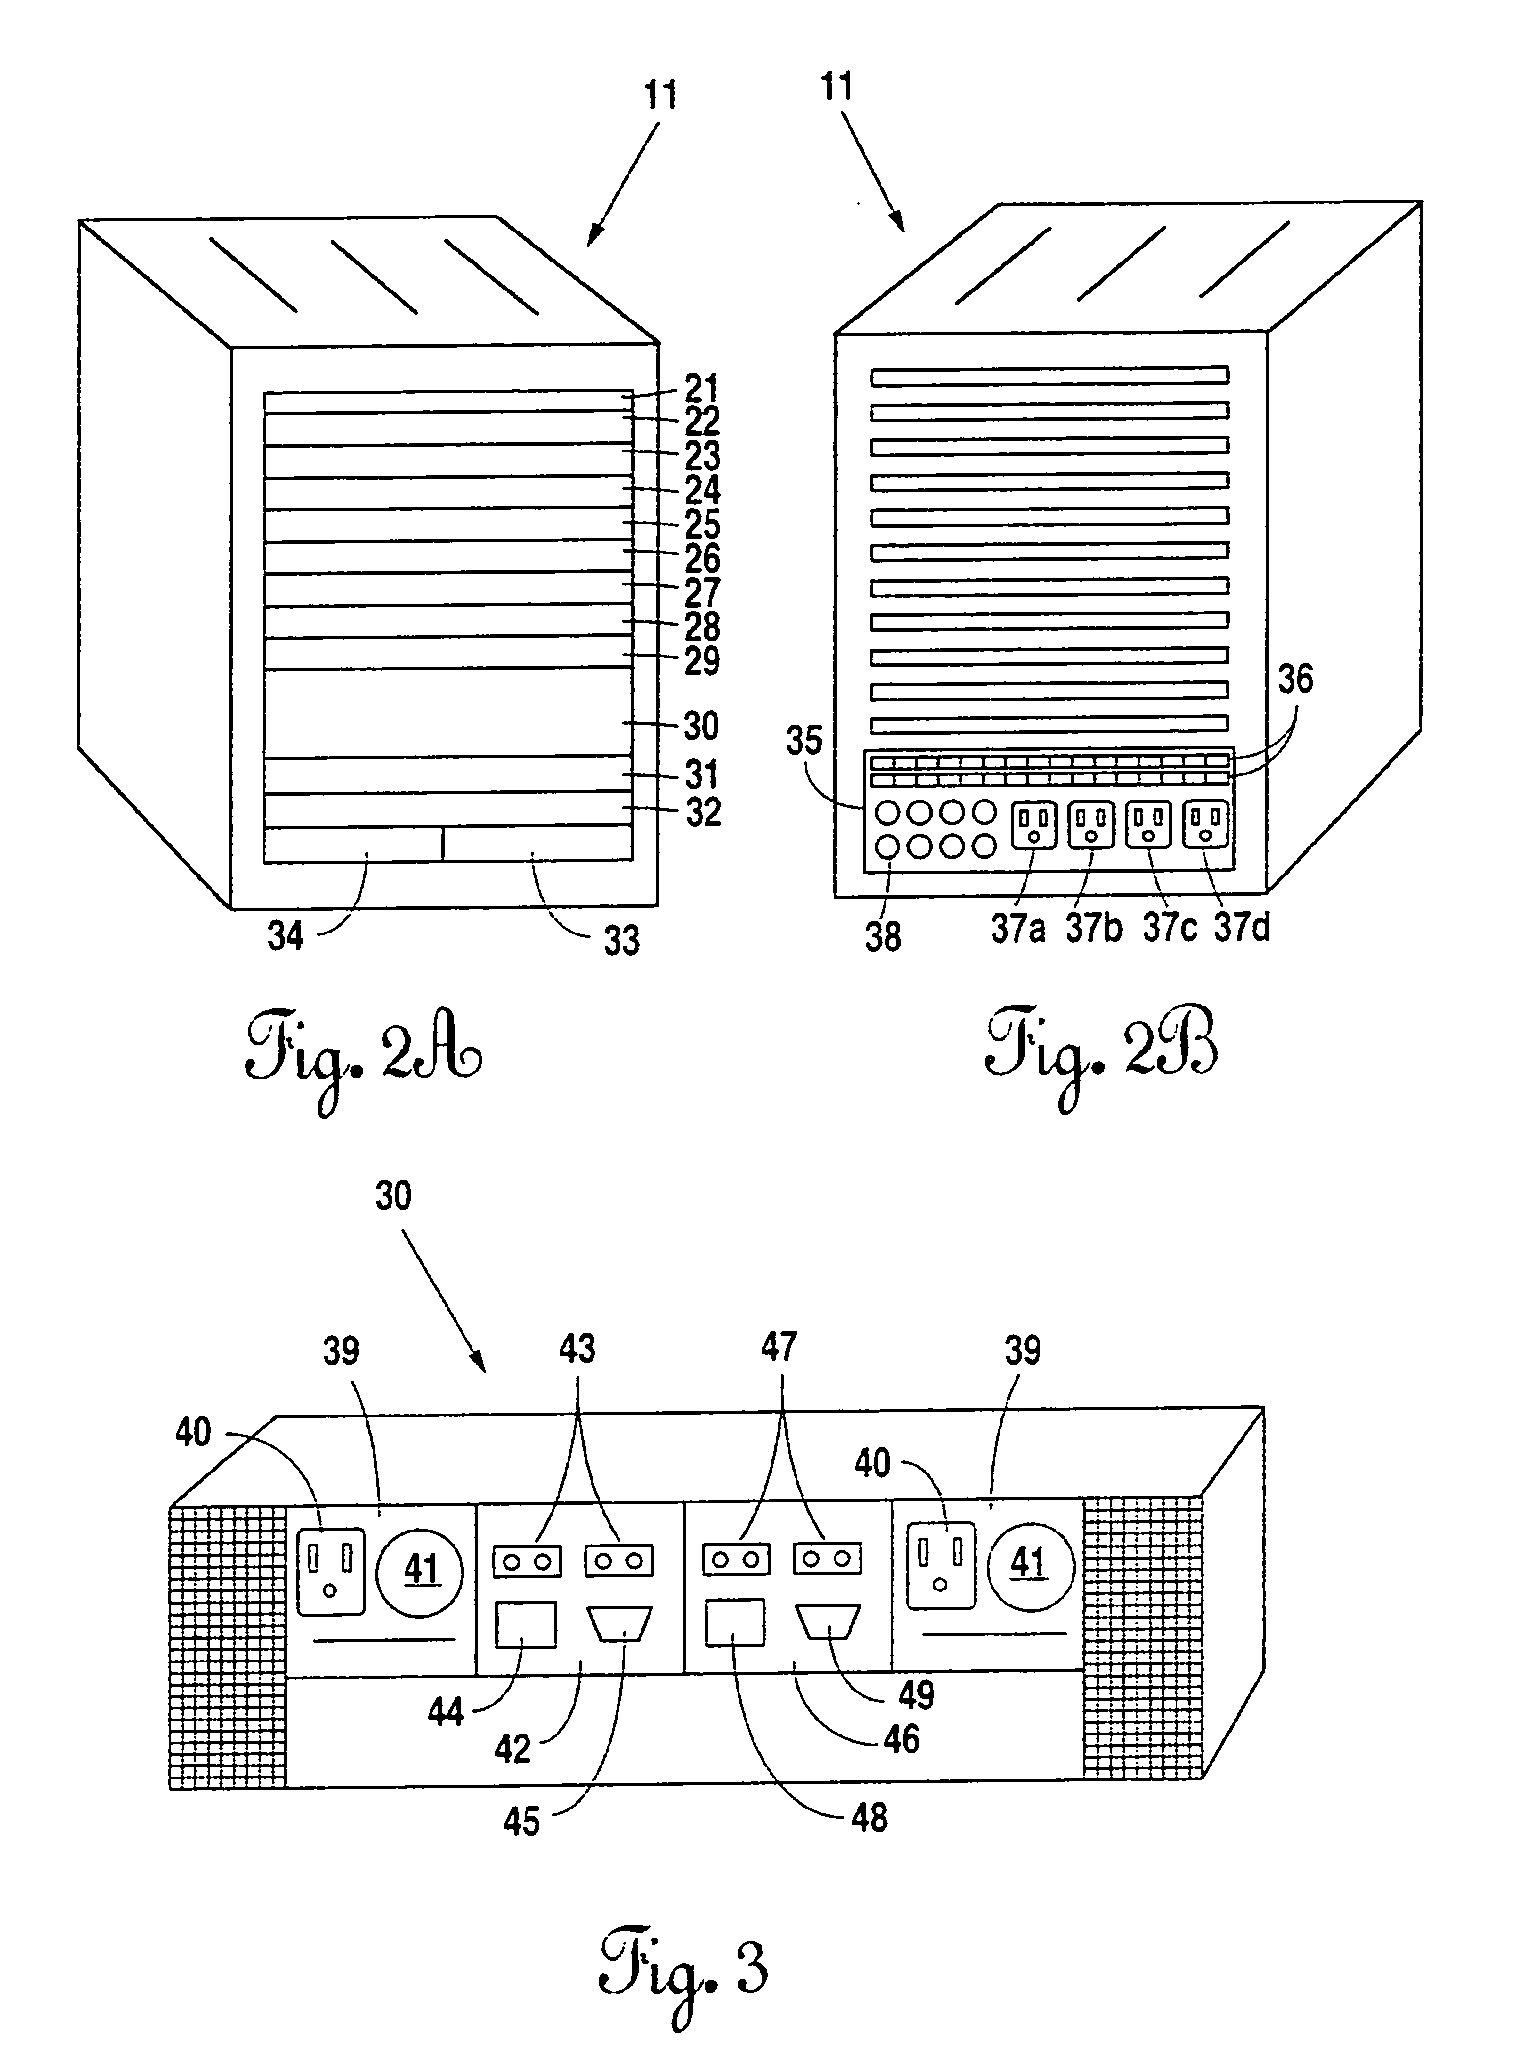 System for server consolidation and mobilization